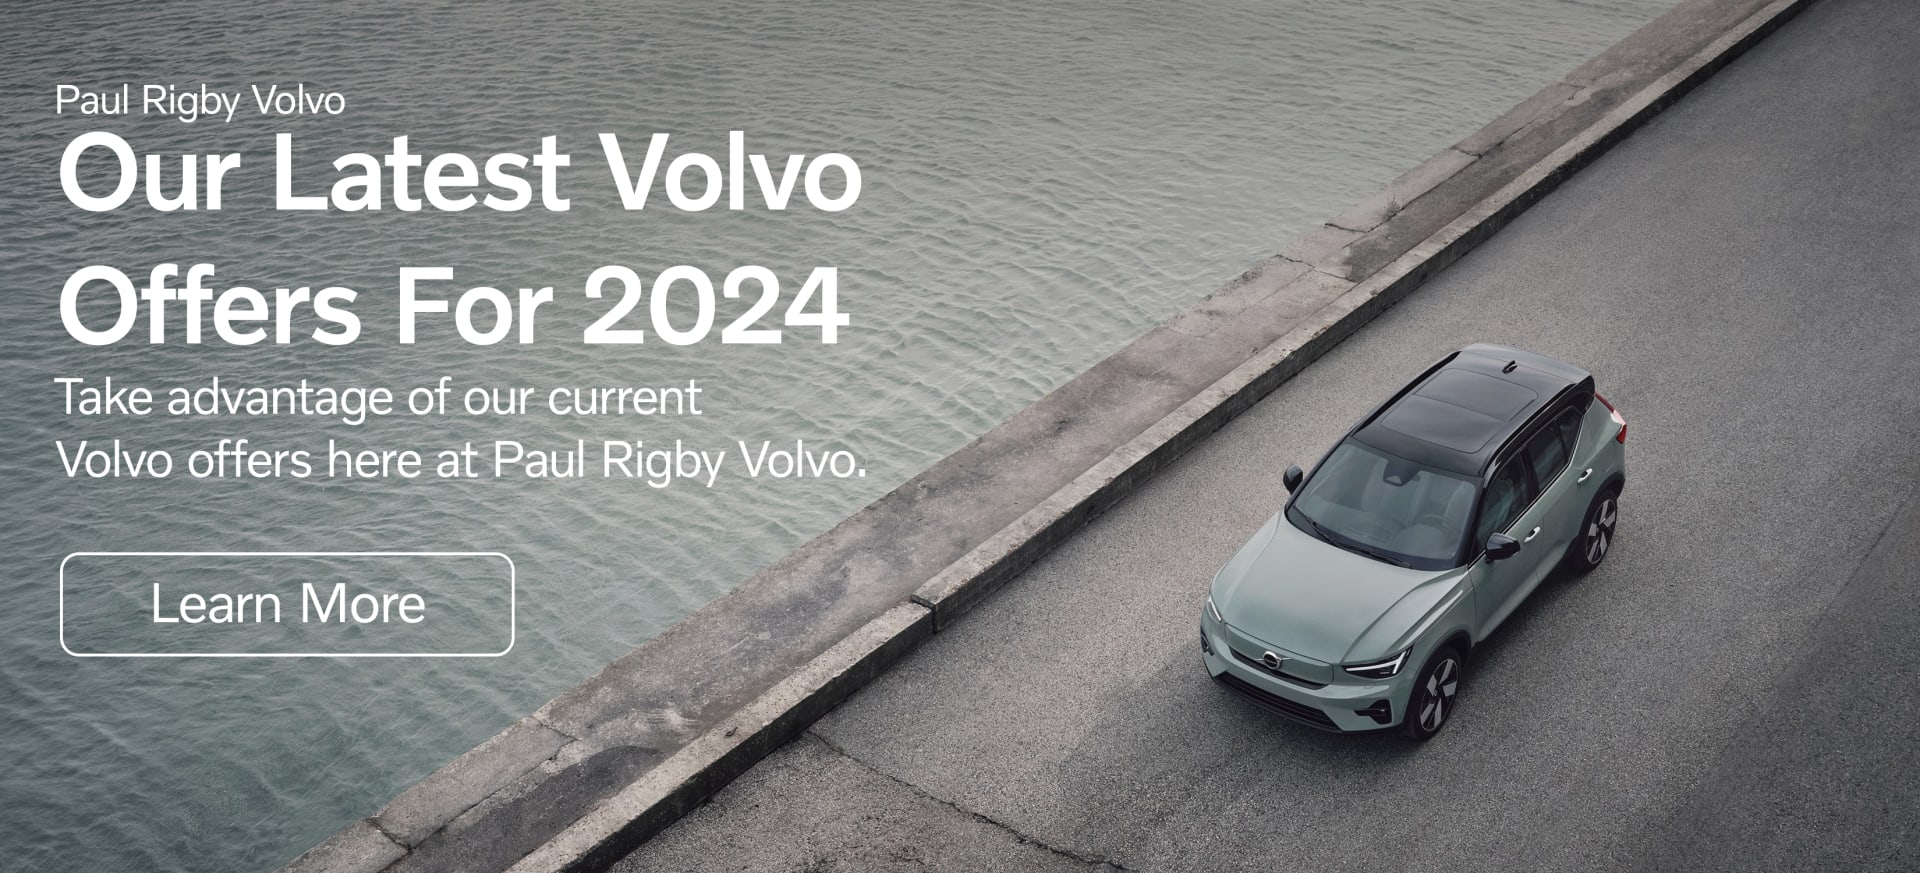 Volvo Offers For 2024 7x2